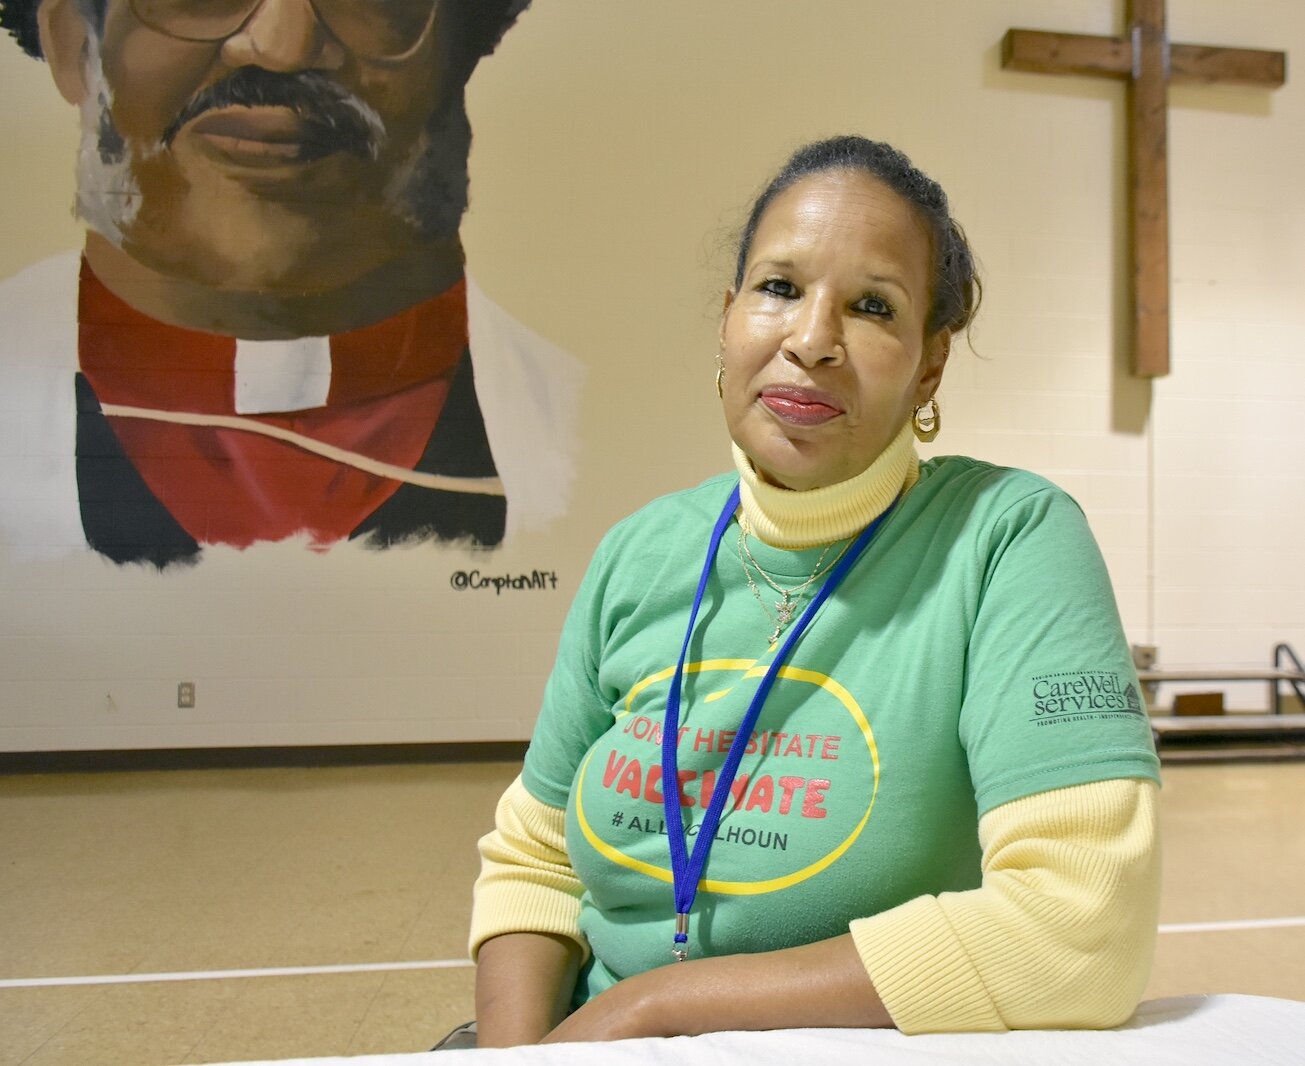 Arniece Montgomery is a caregiver to her father and has been a COVID ambassador. She’s seen here at Washington Heights United Methodist Church.